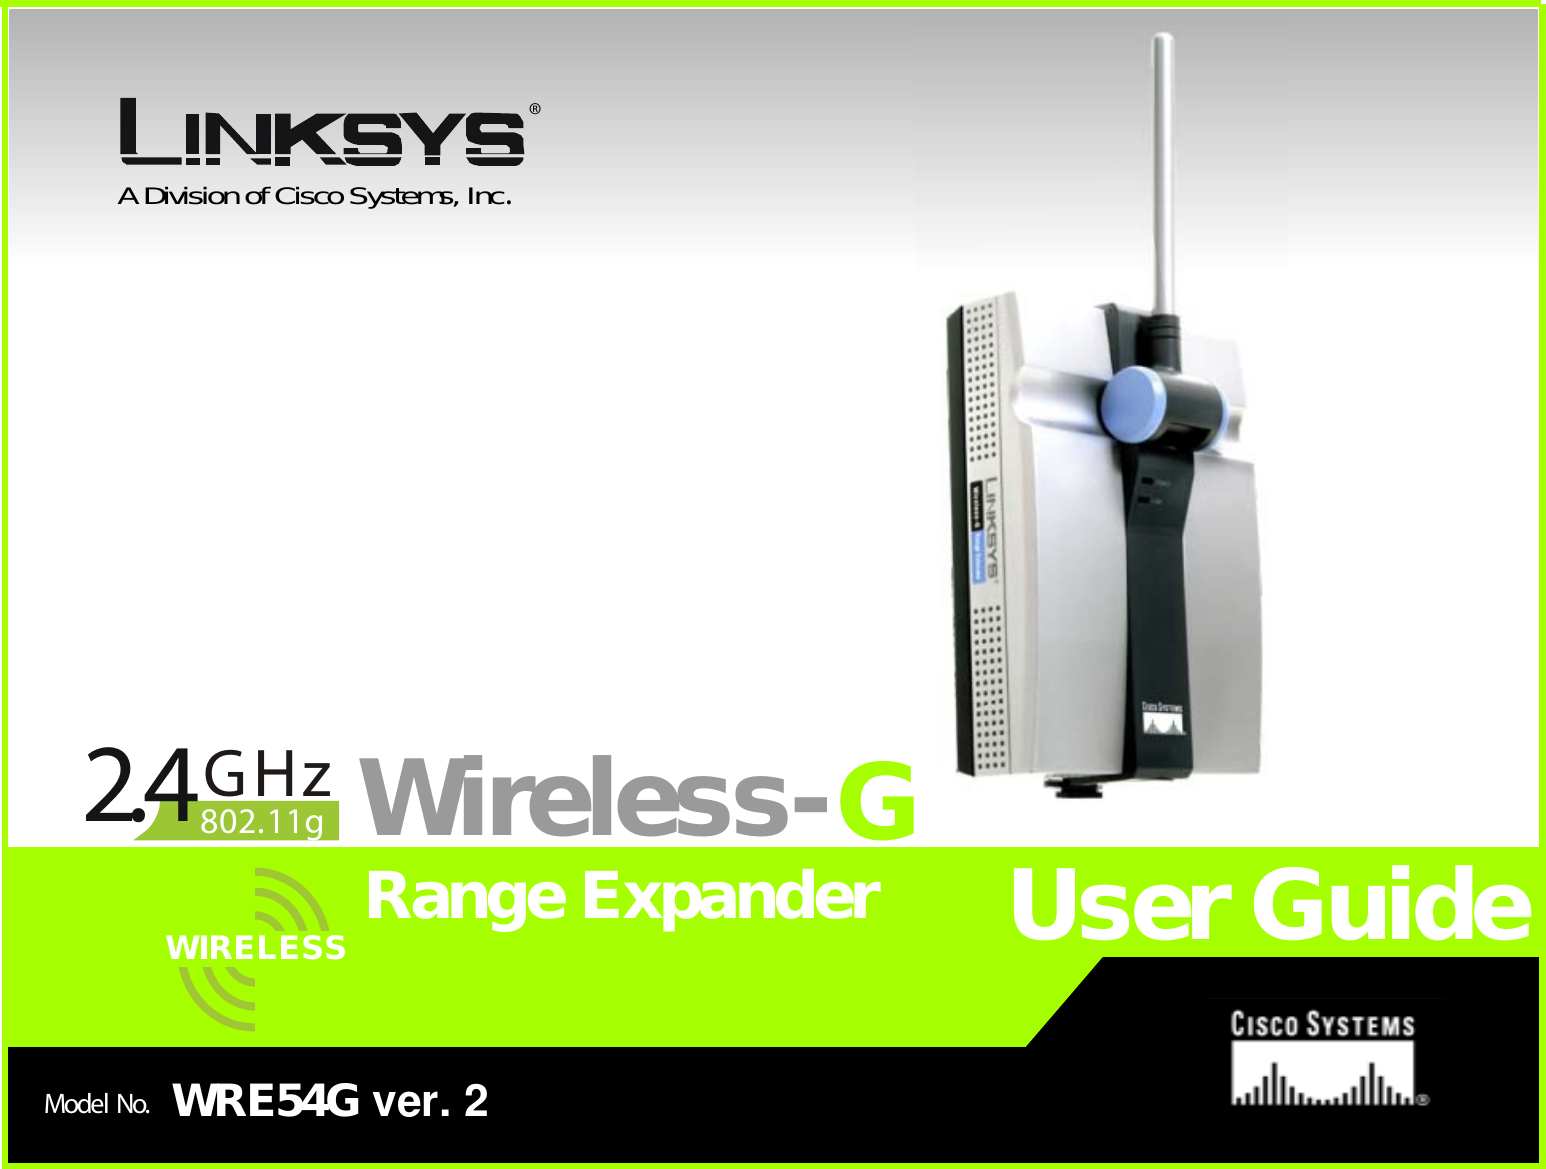 A Division of Cisco Systems, Inc.®Model No.Range ExpanderWireless-GWRE54G ver. 2User GuideGHz2.4802.11gWIRELESS